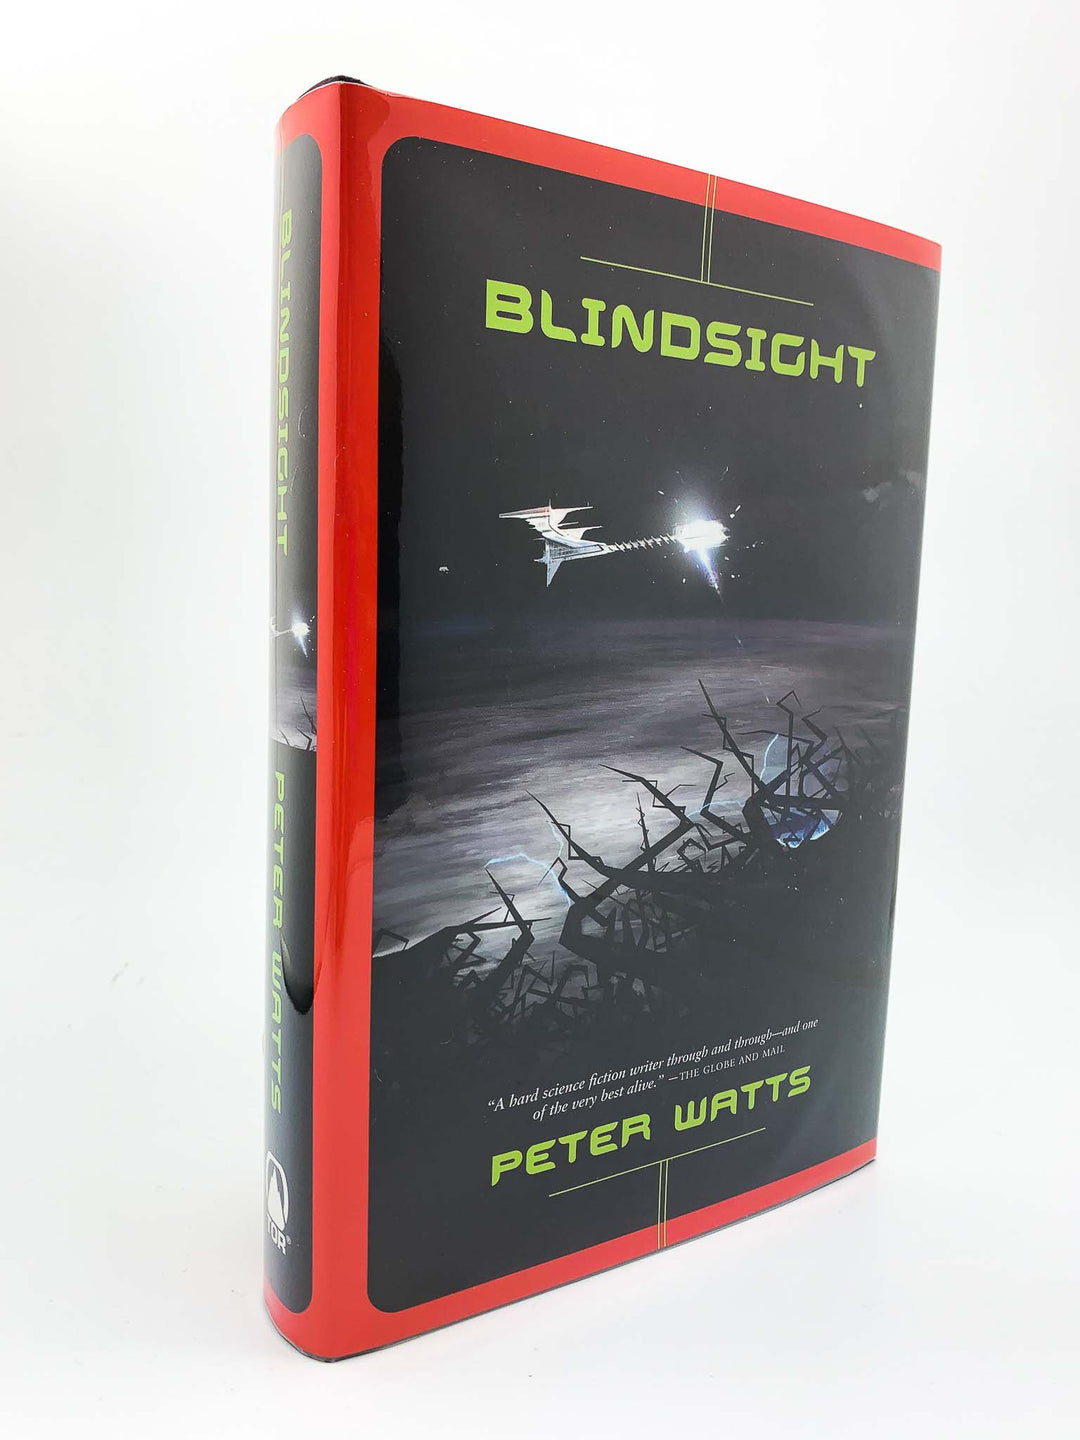 Watts, Peter - Blindsight | front cover